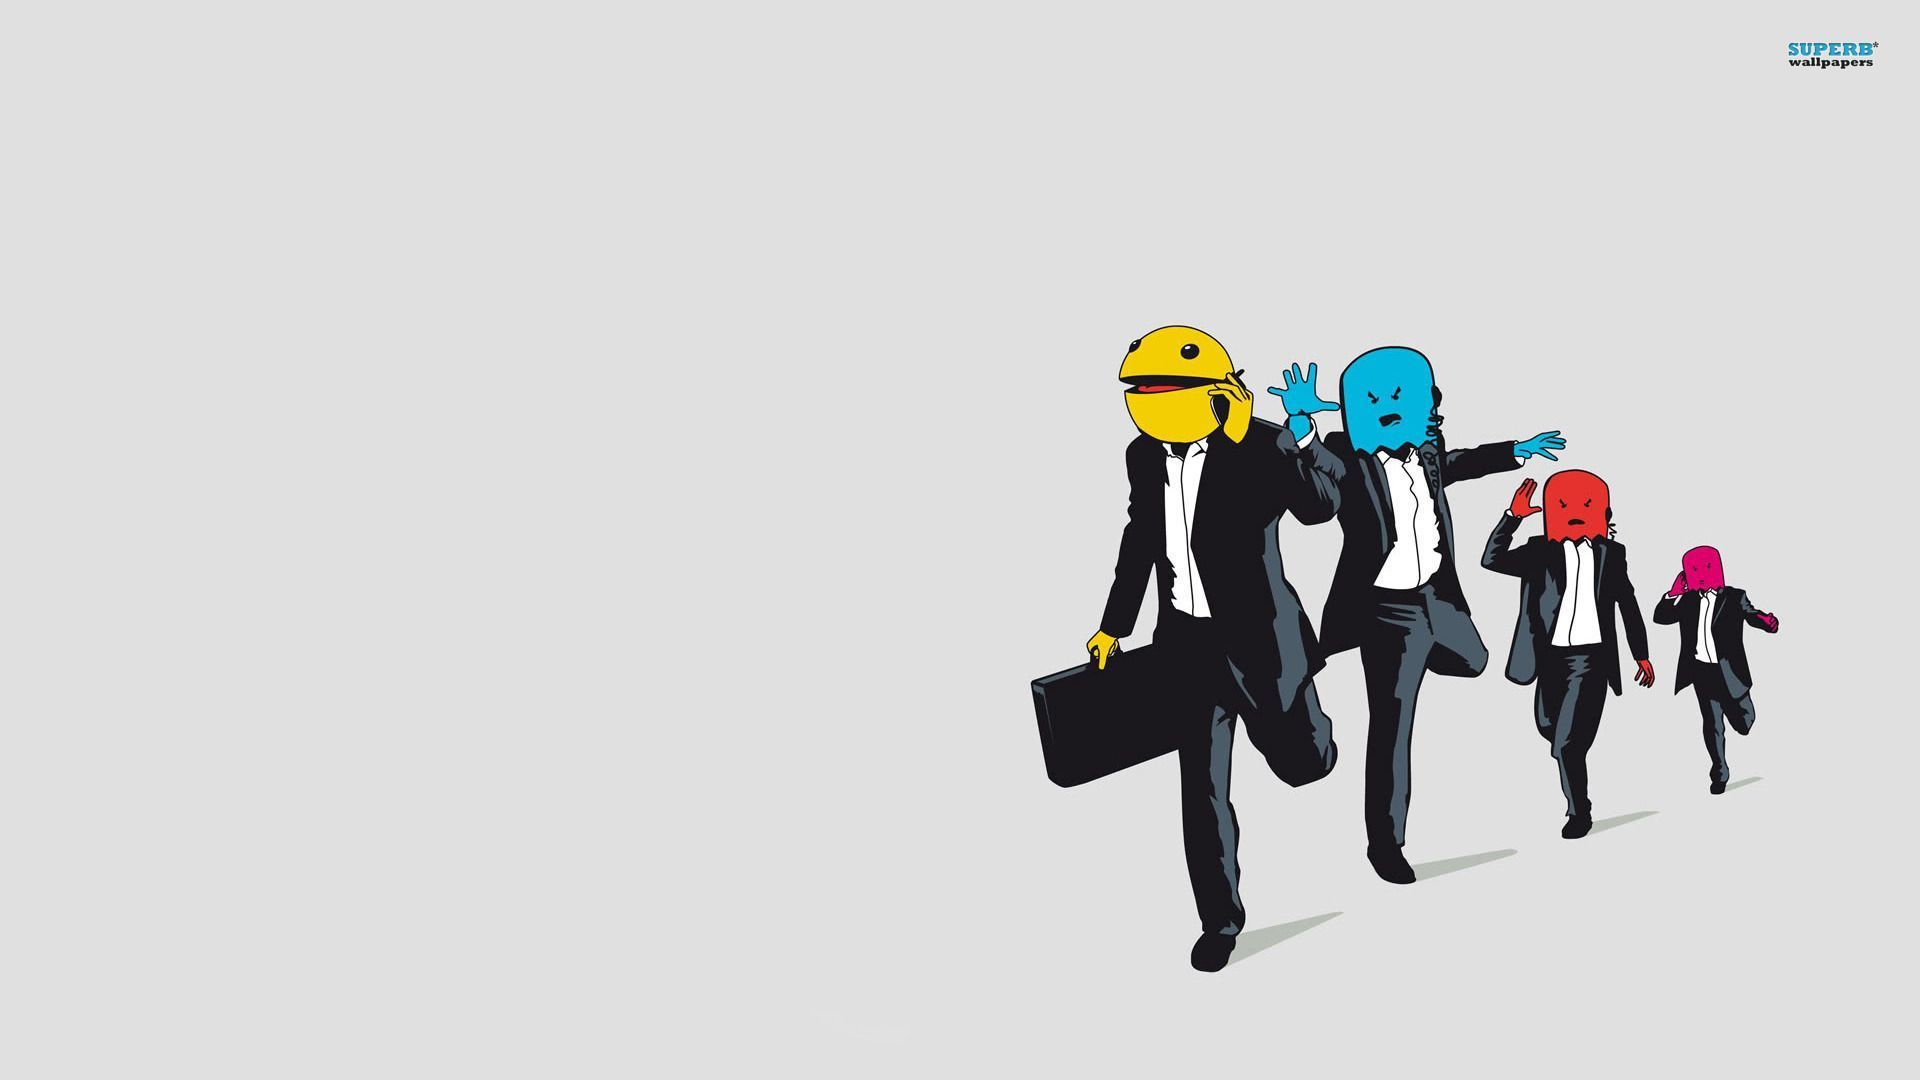 Business Pac-Man chased by ghosts wallpaper - Game wallpapers - #14575